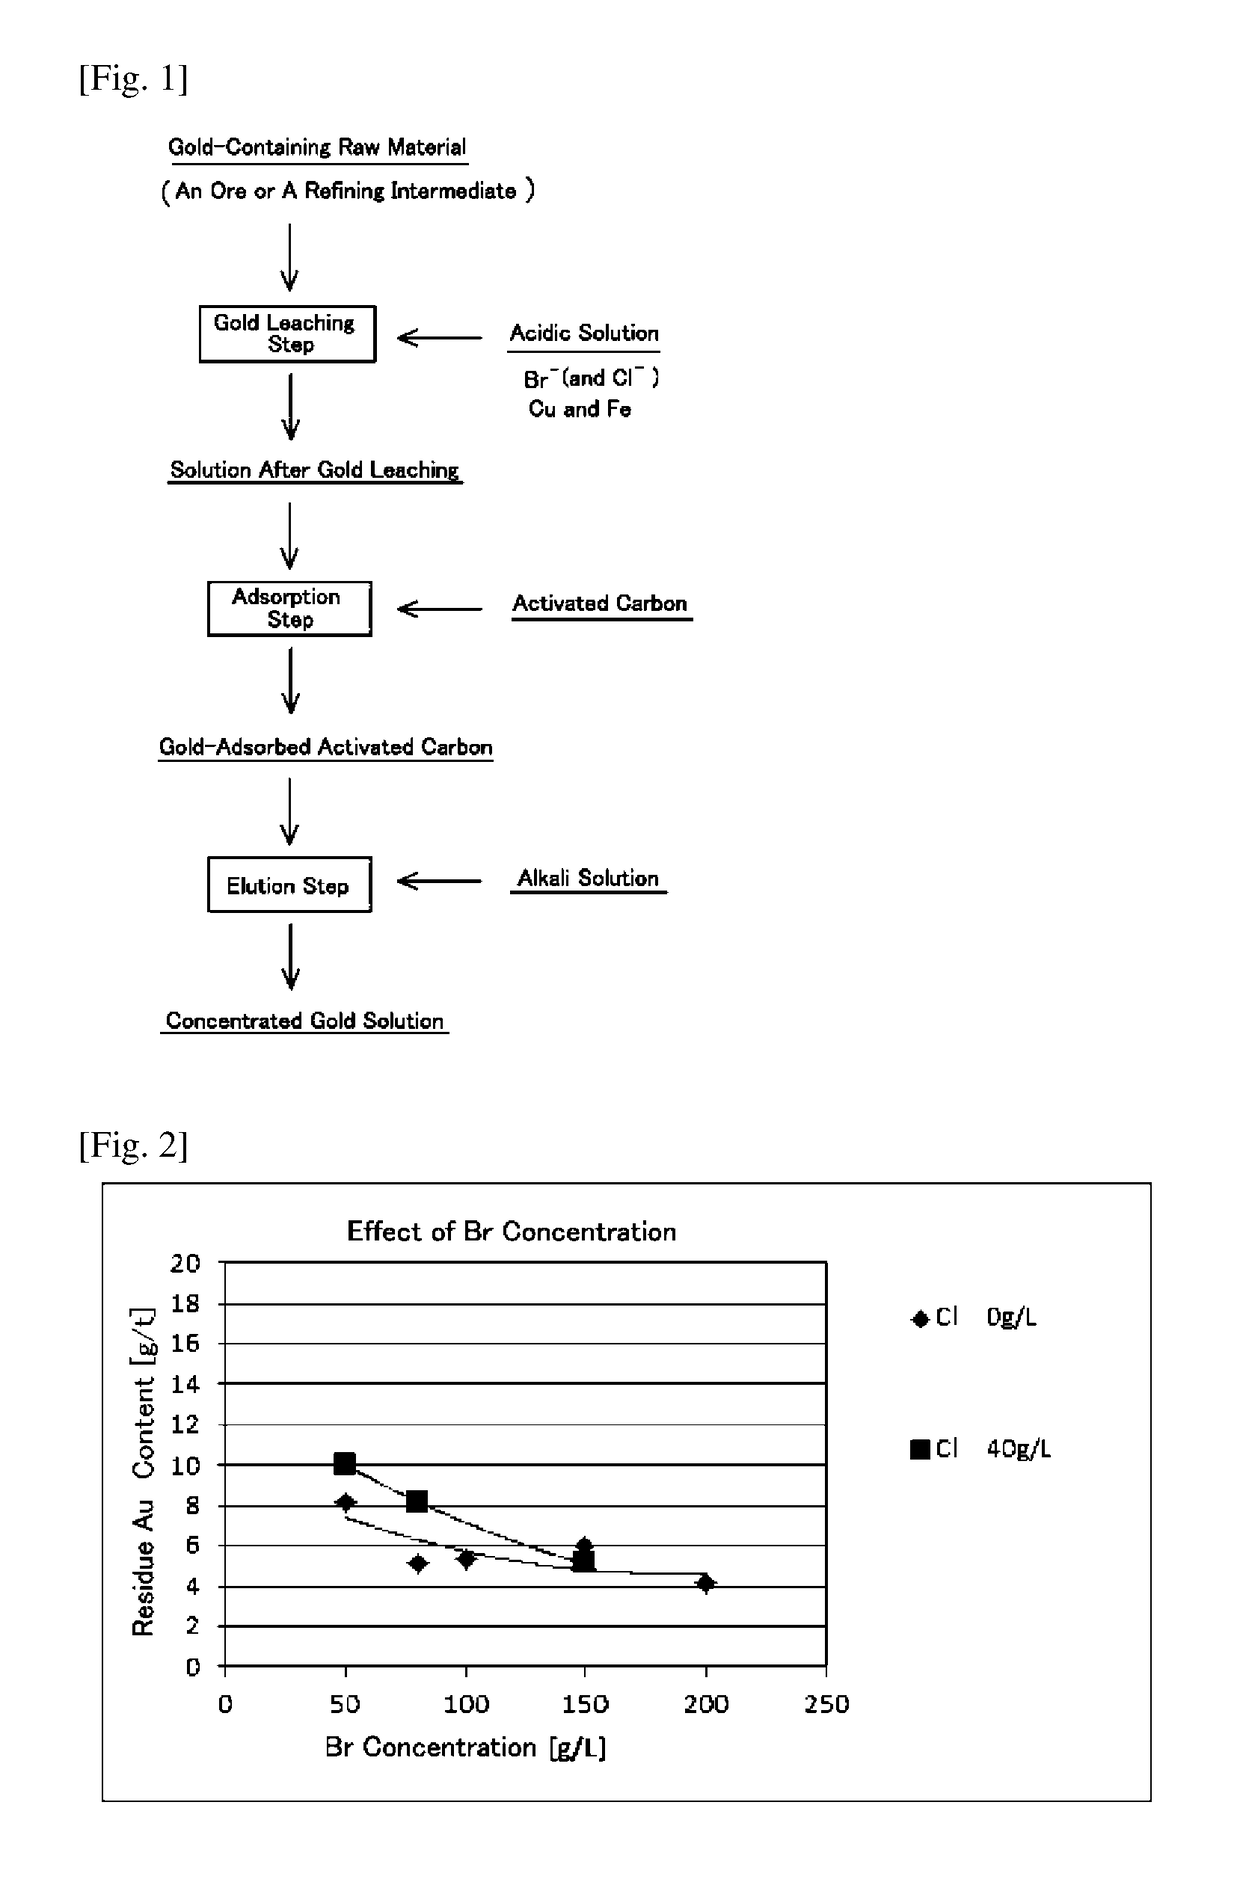 Method for recovering gold from an ore or a refining intermediate containing gold